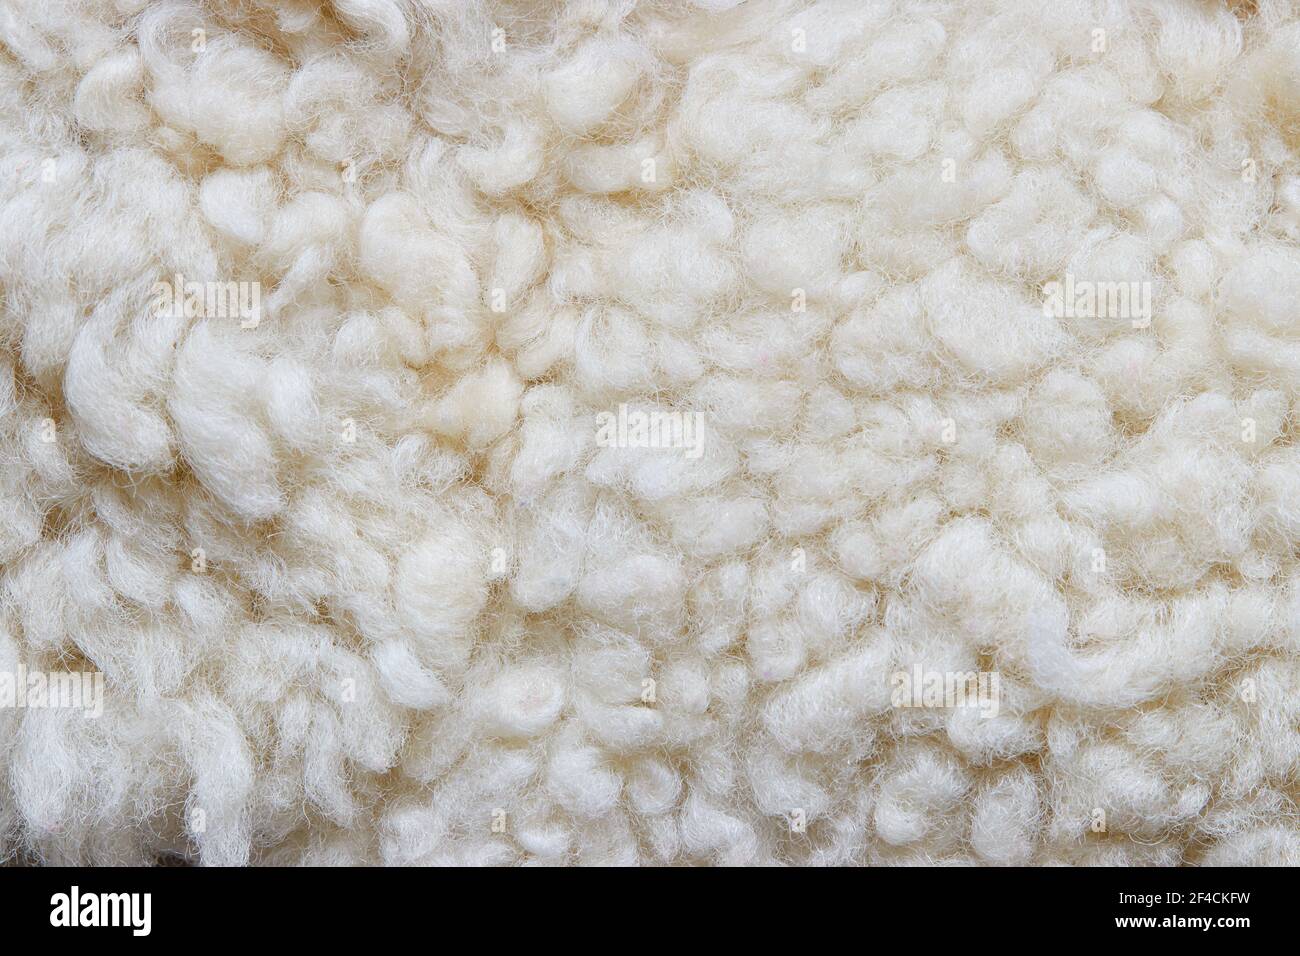 White soft wool background, detail of a natural sheepskin rug. Stock Photo